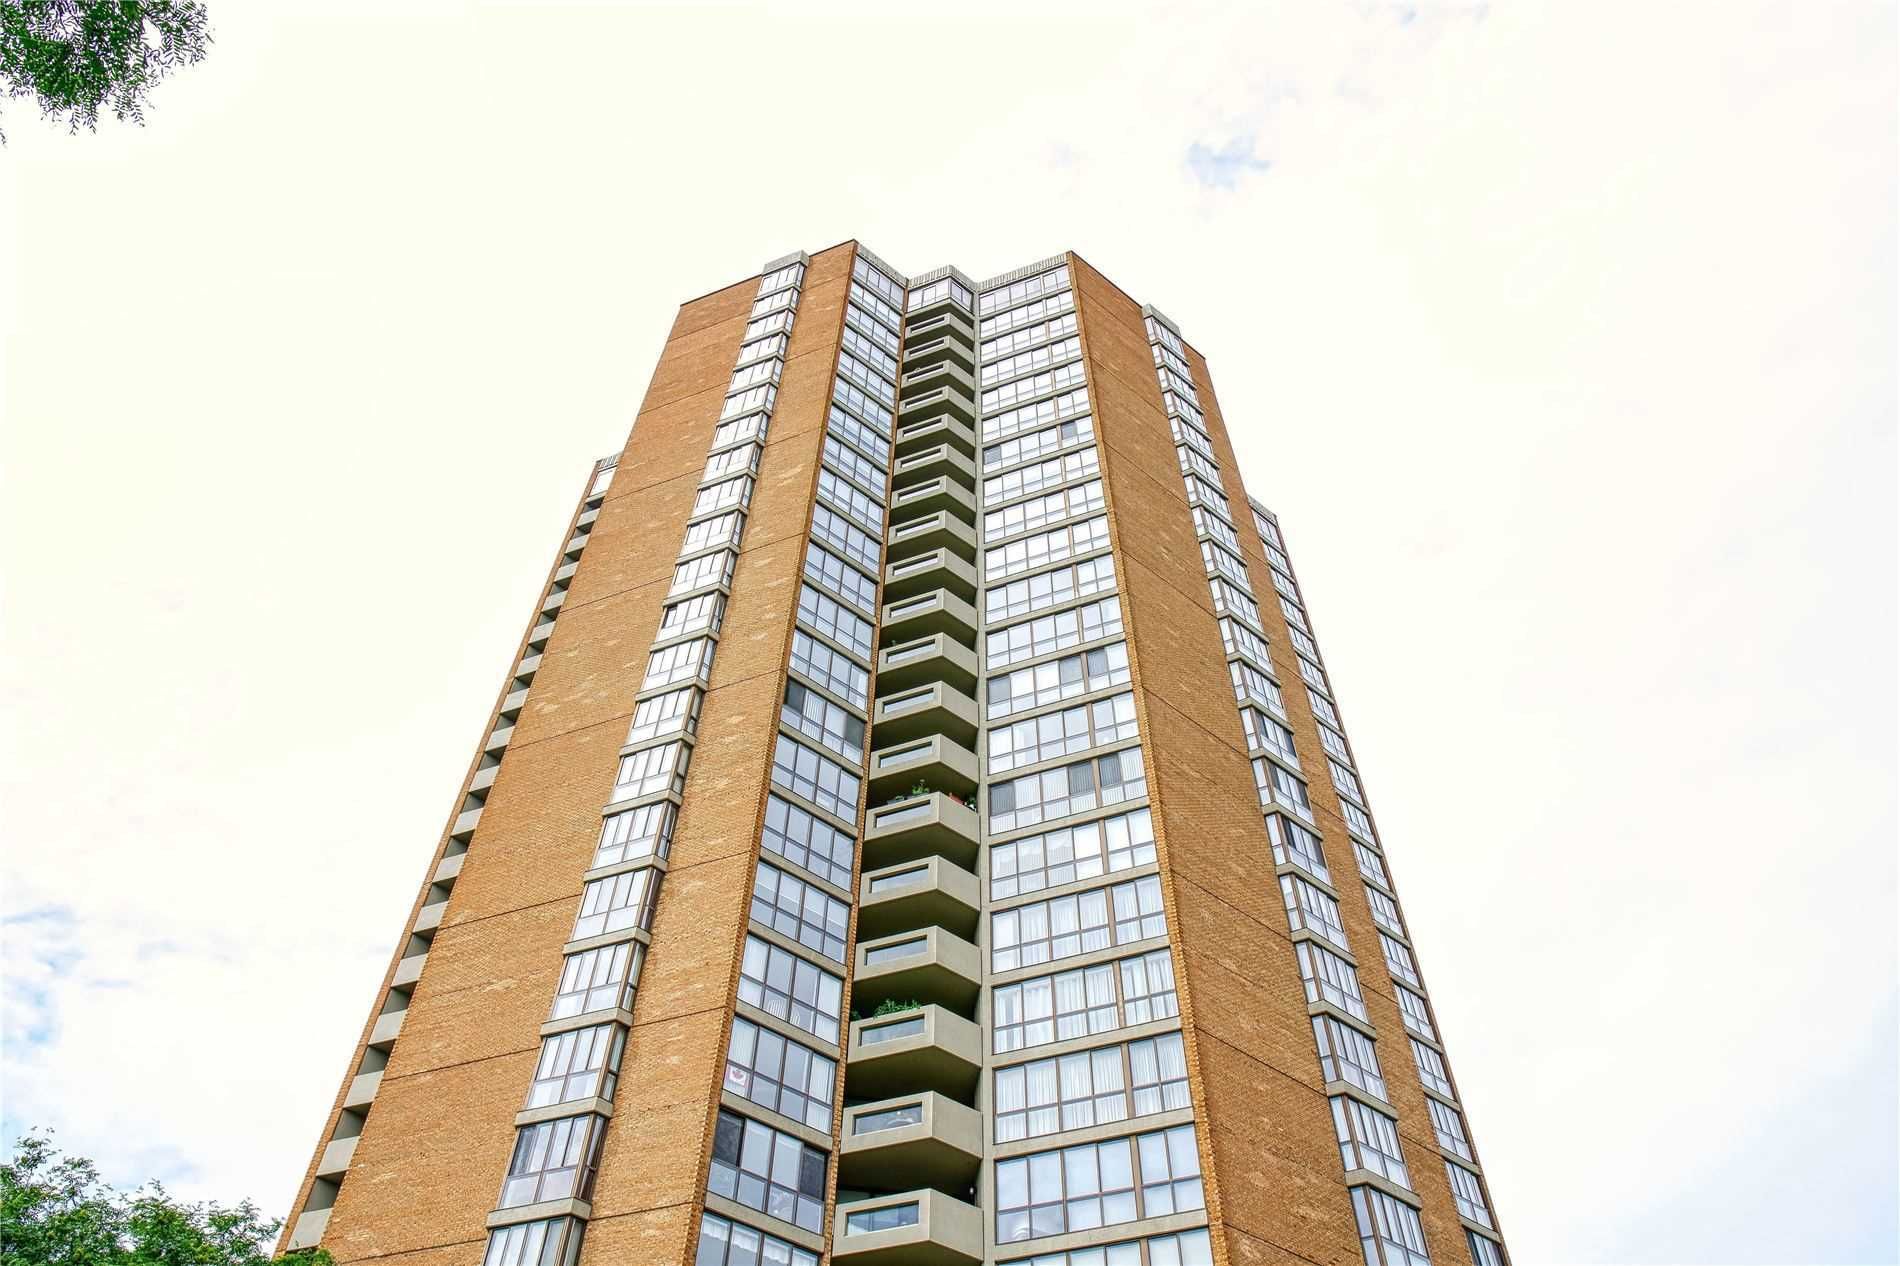 2000 Islington Ave. This condo at Islington 2000 Condos is located in  Etobicoke, Toronto - image #2 of 3 by Strata.ca